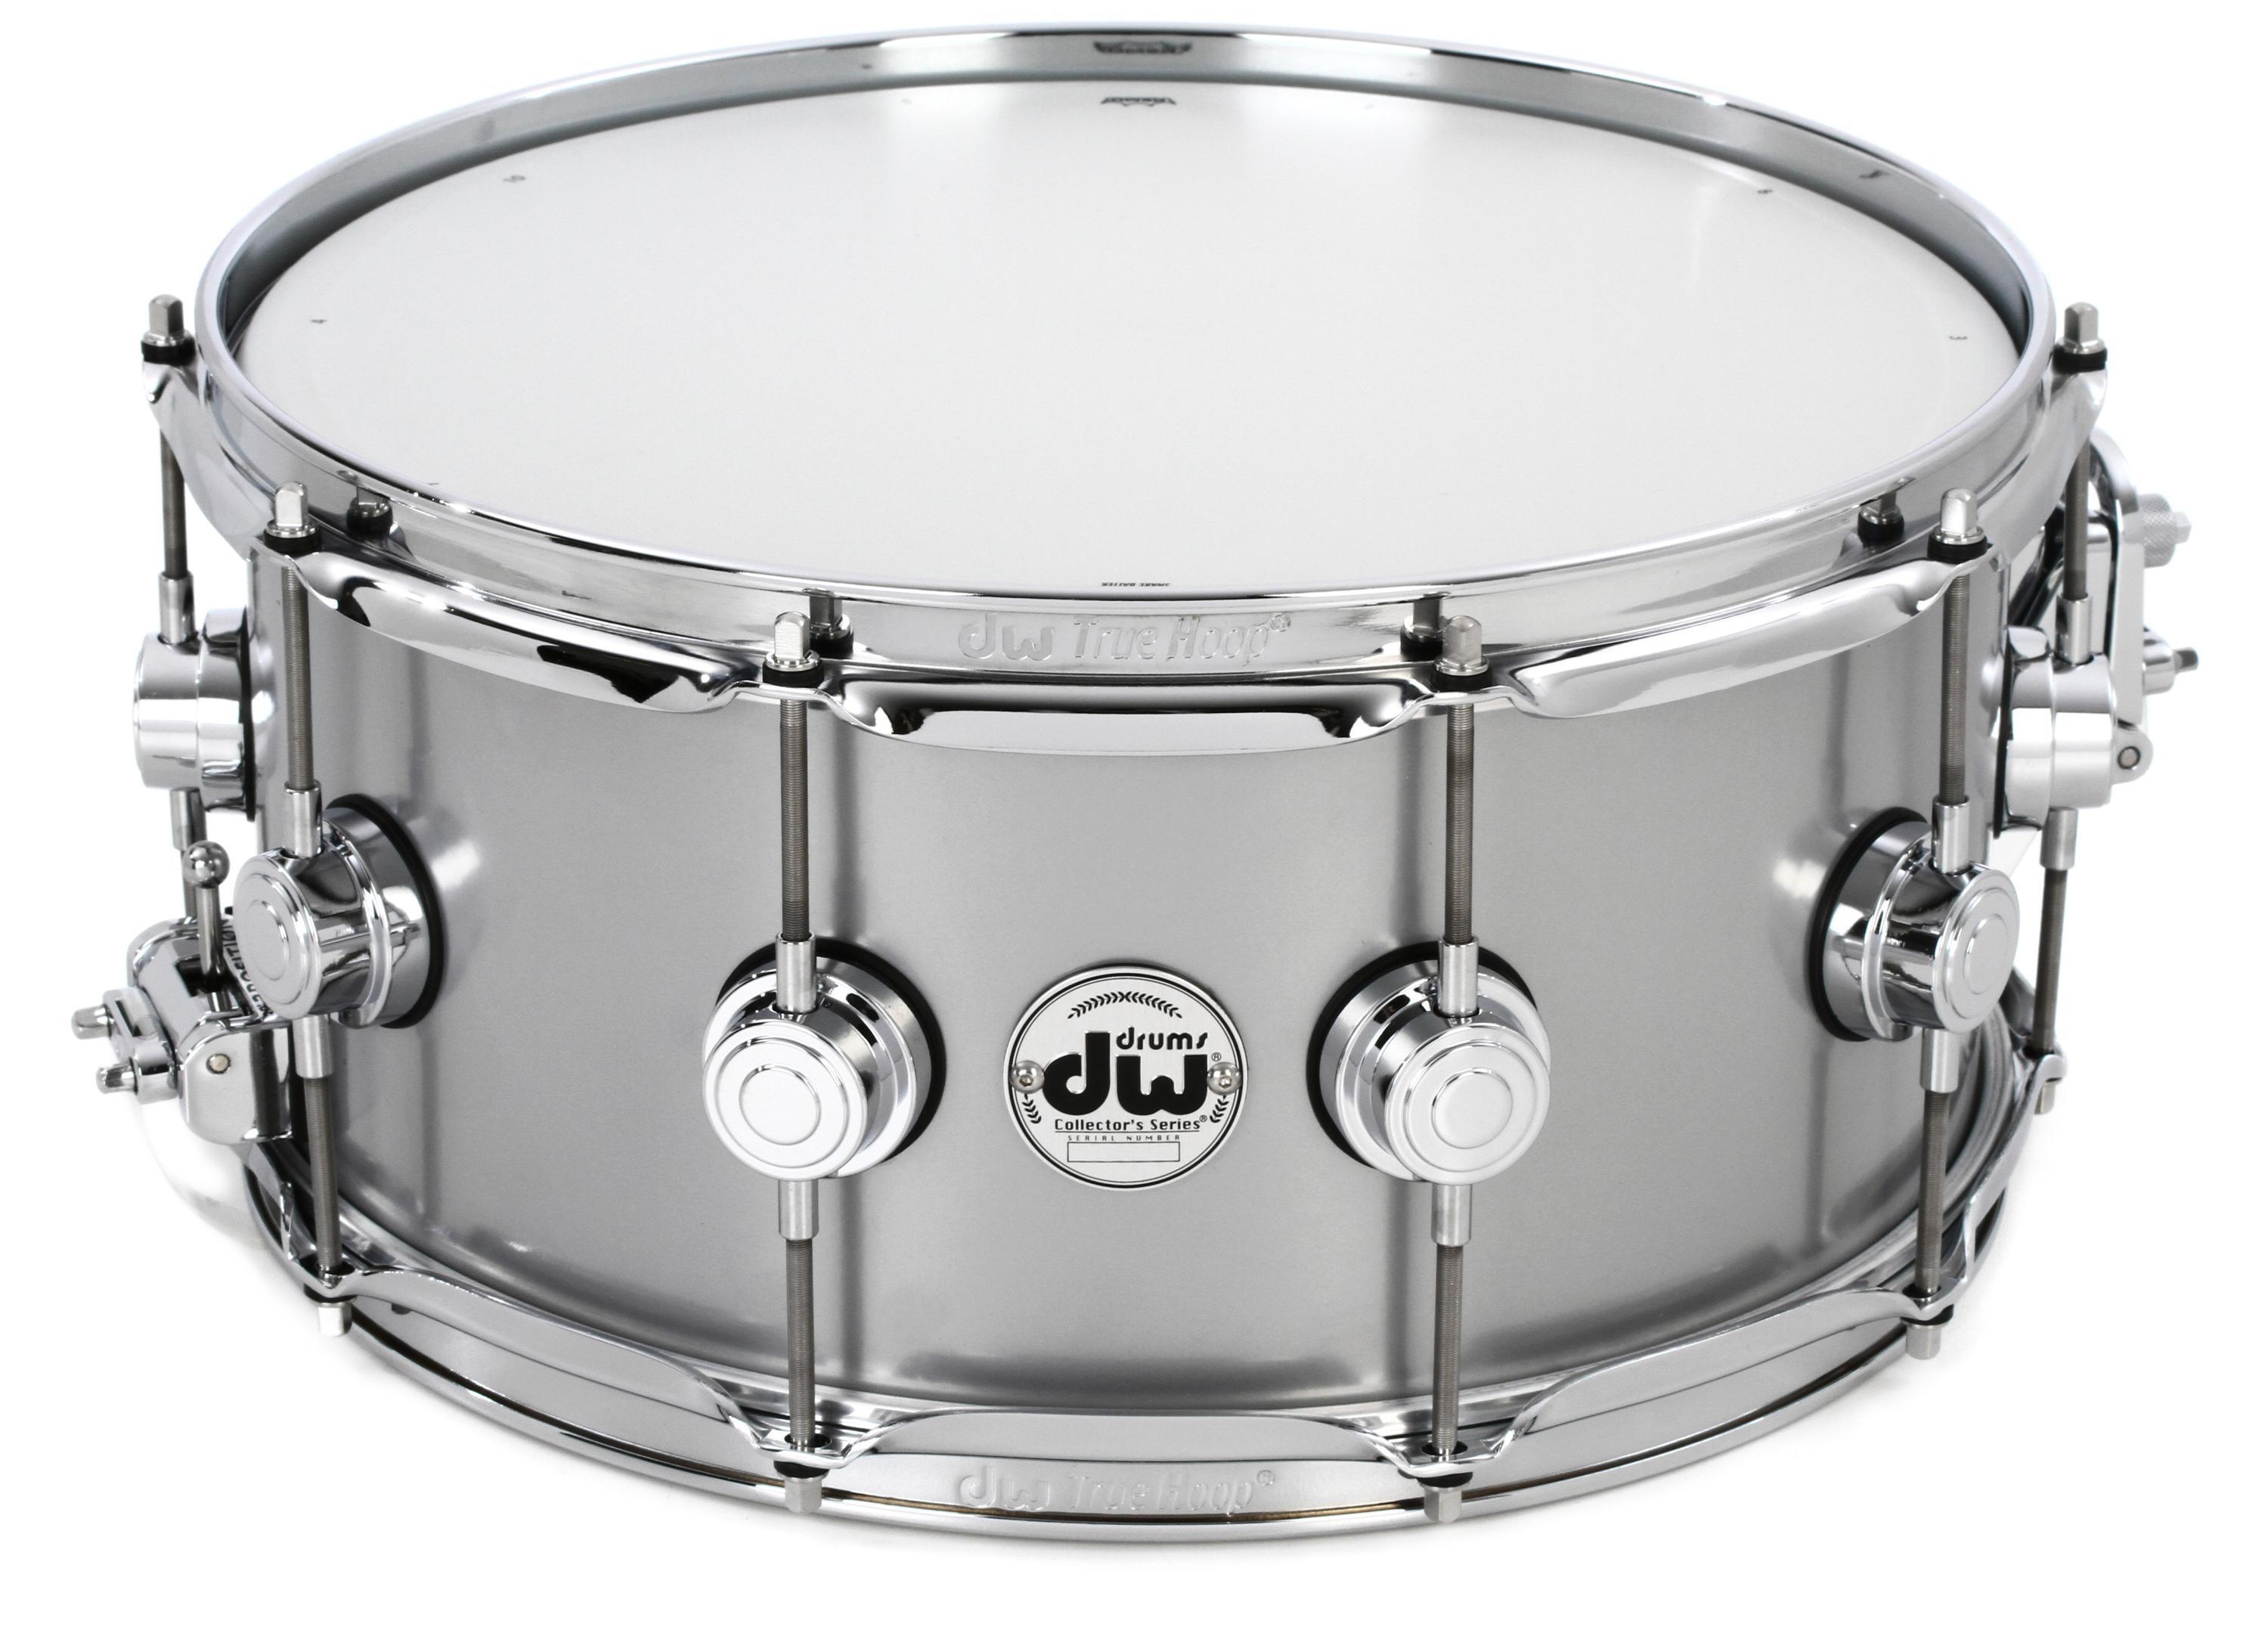 DW Drums' first full Stainless Steel drum set 